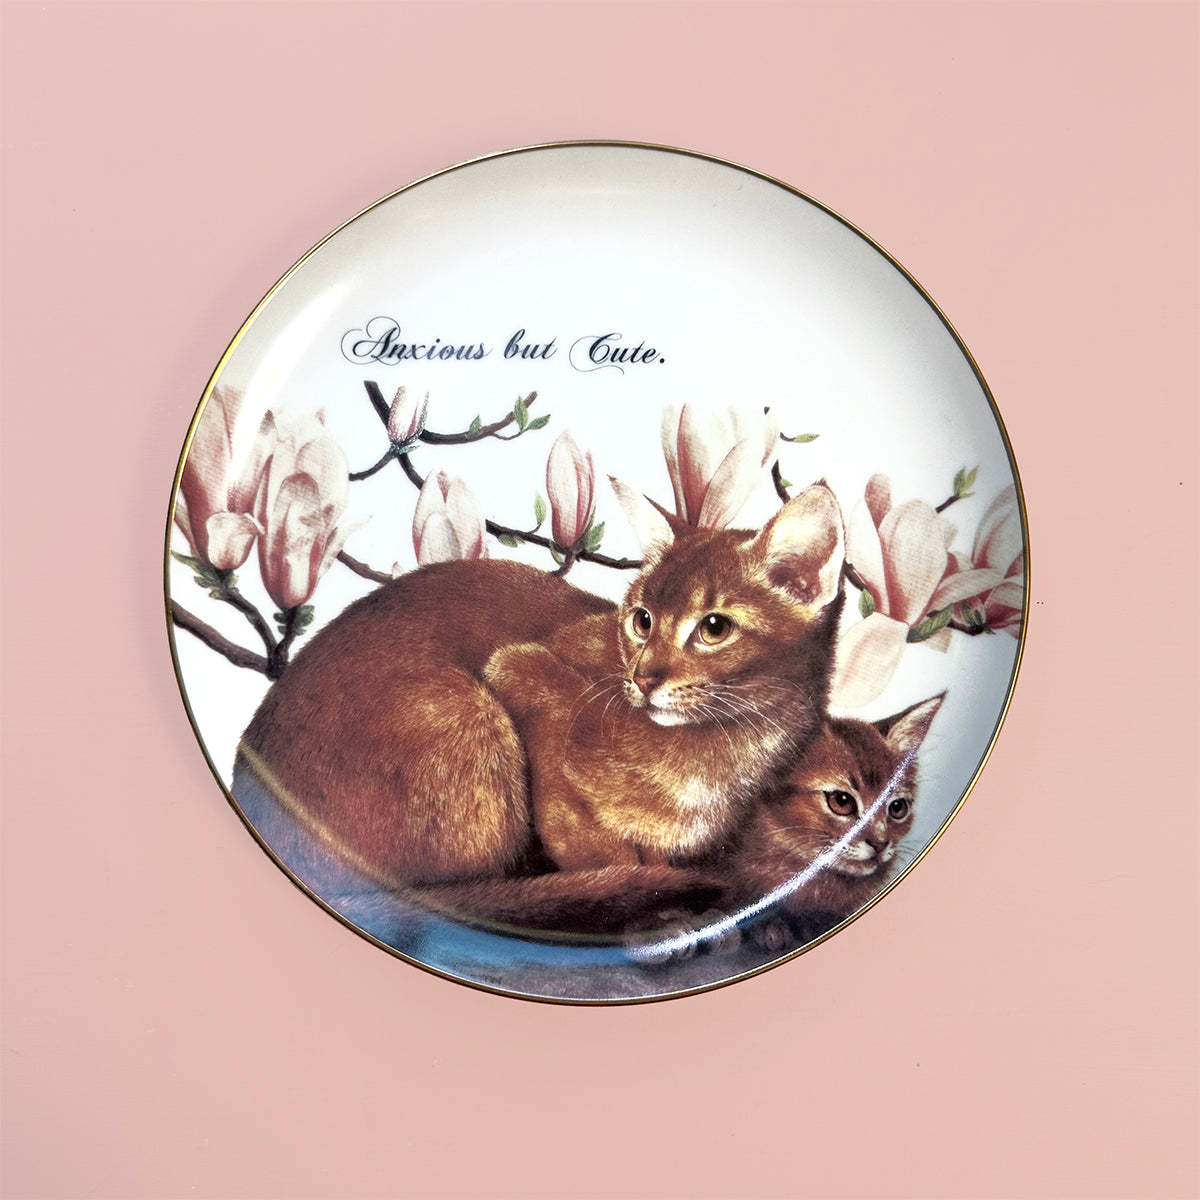 Vintage Art Plate - Cat plate - "Anxious but Cute"